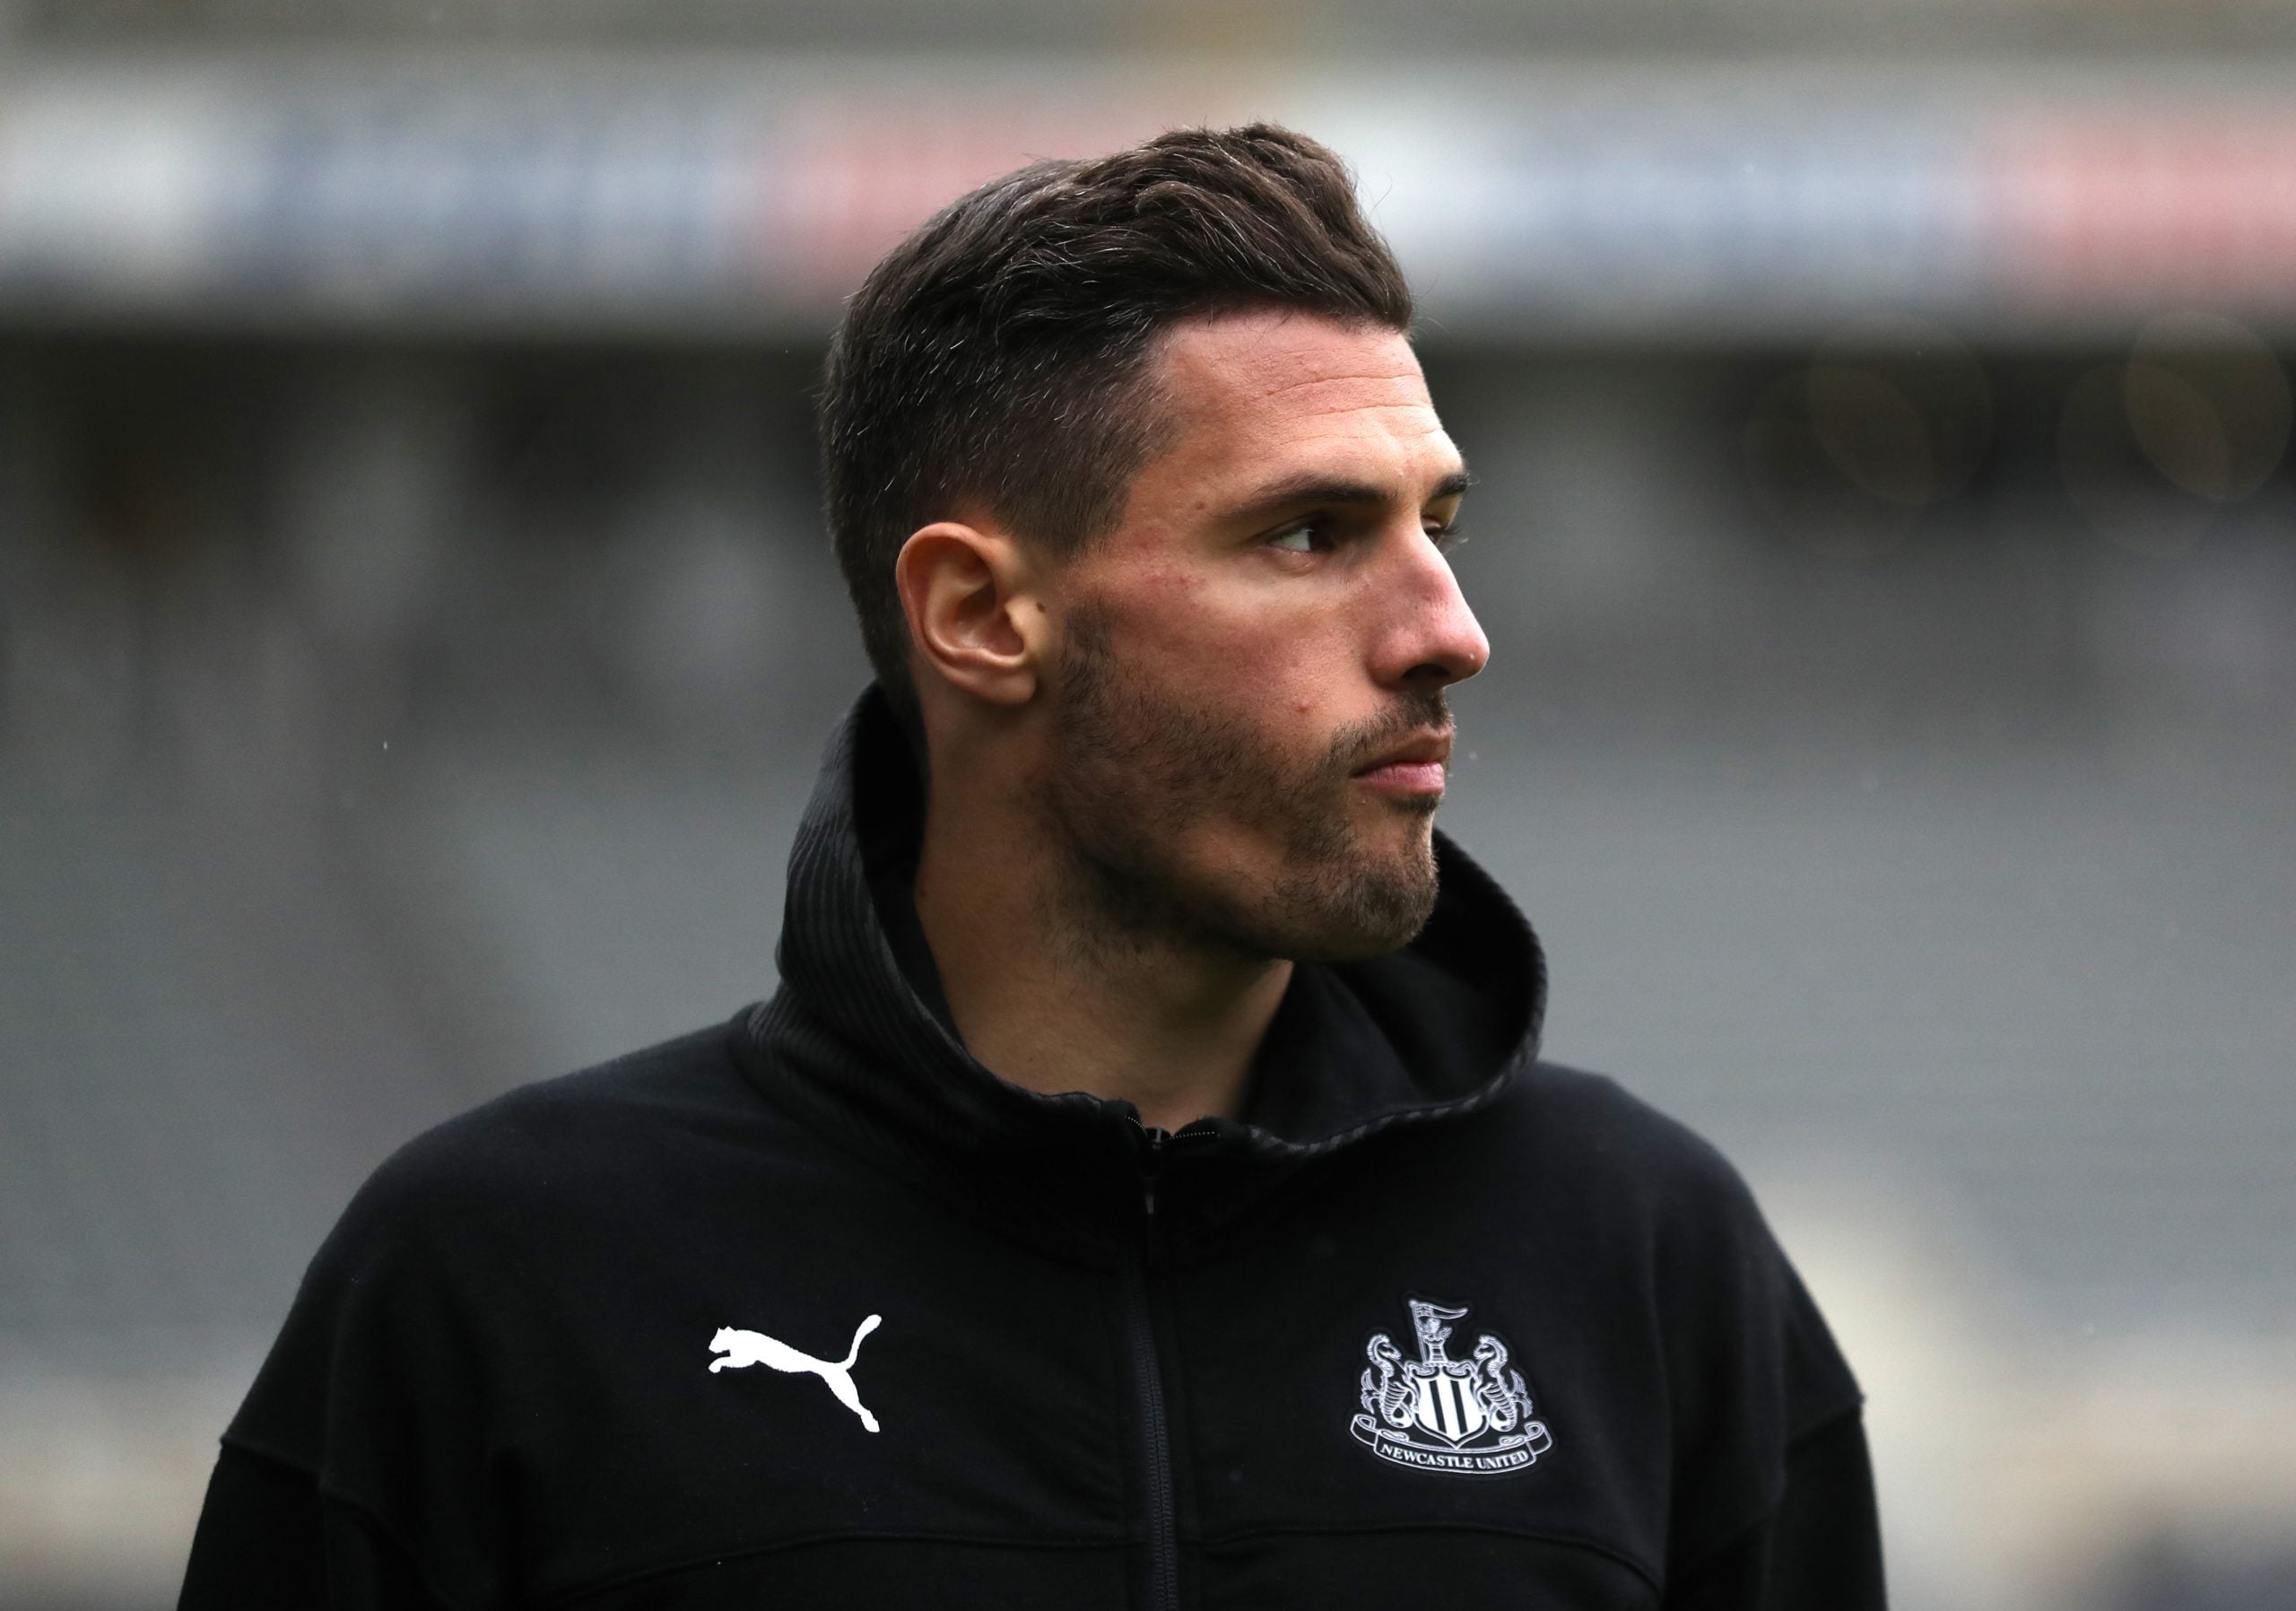 Newcastle United's Schar may turn down contract extension (Schar is seen in the picture)